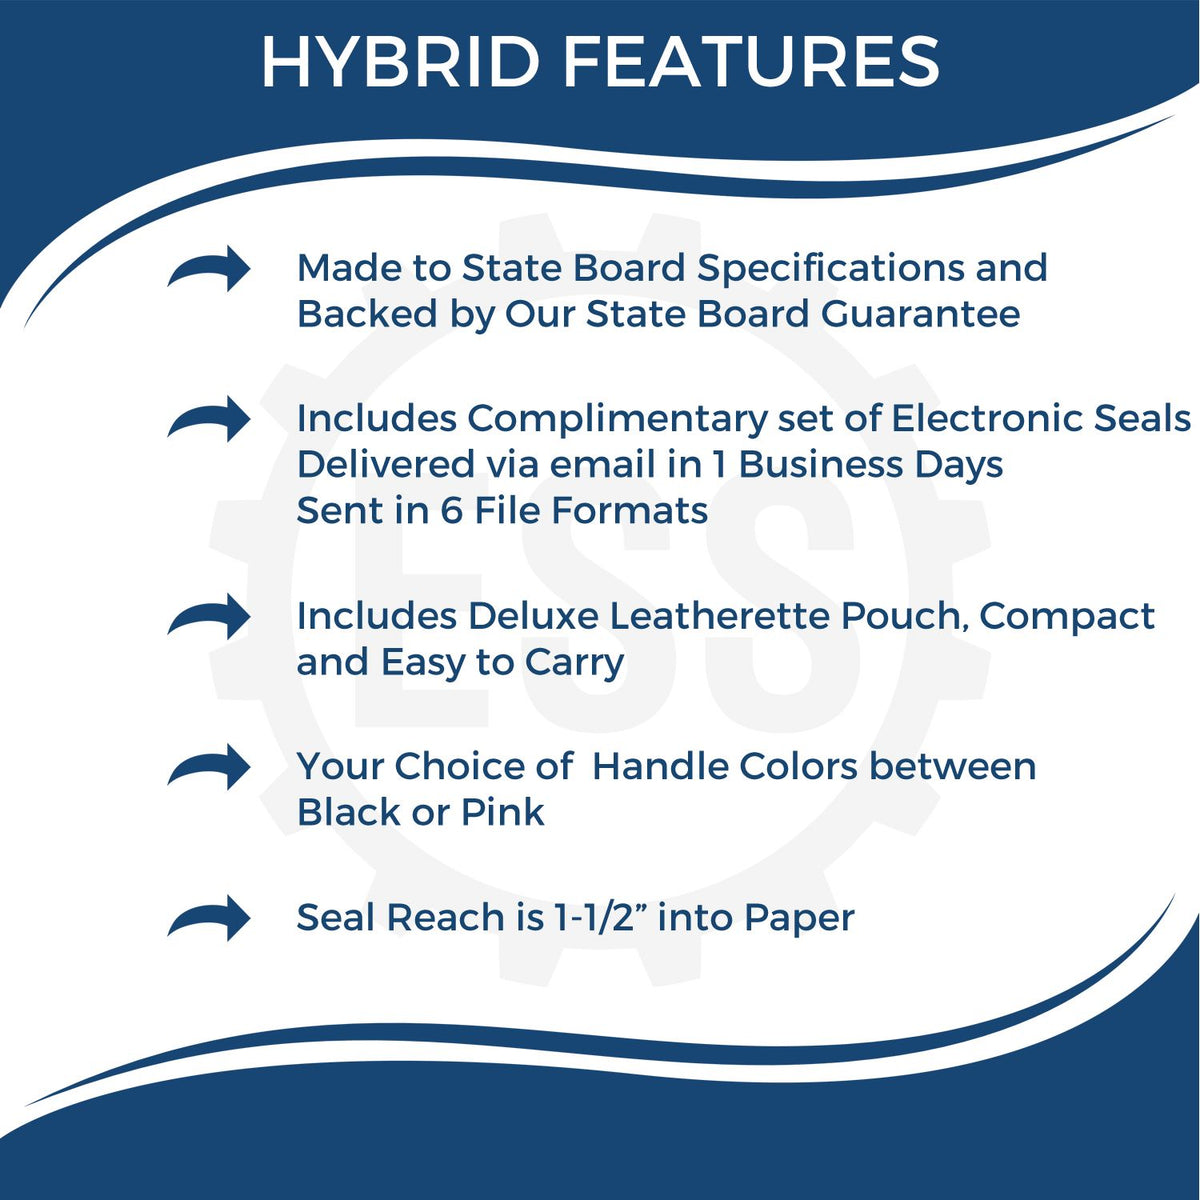 A picture of an infographic highlighting the selling points for the Hybrid Ohio Land Surveyor Seal